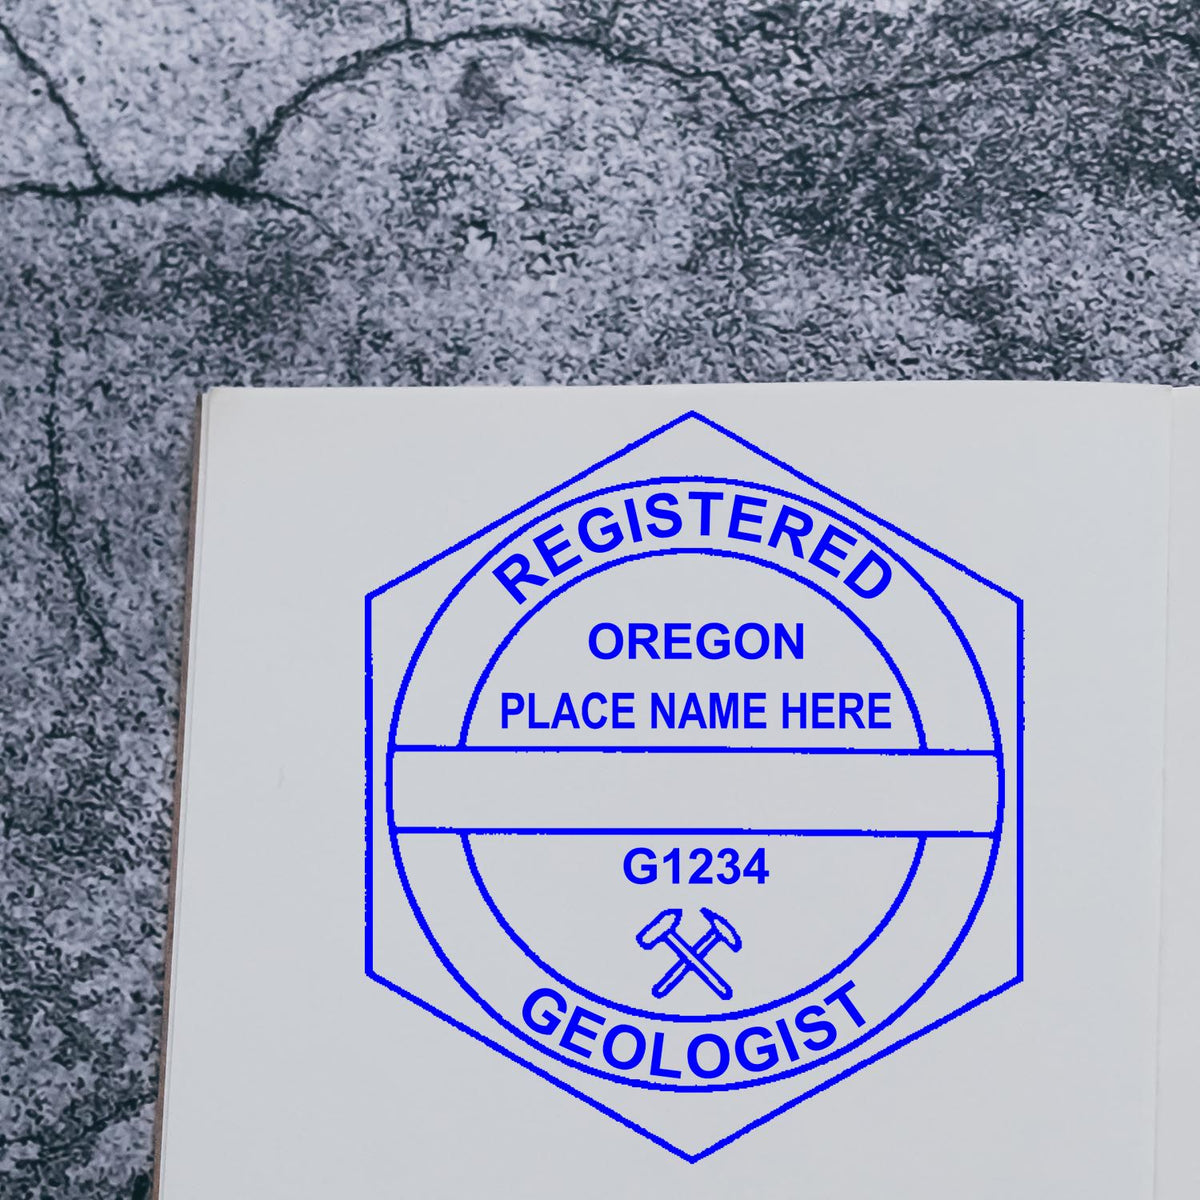 The Slim Pre-Inked Oregon Professional Geologist Seal Stamp stamp impression comes to life with a crisp, detailed image stamped on paper - showcasing true professional quality.